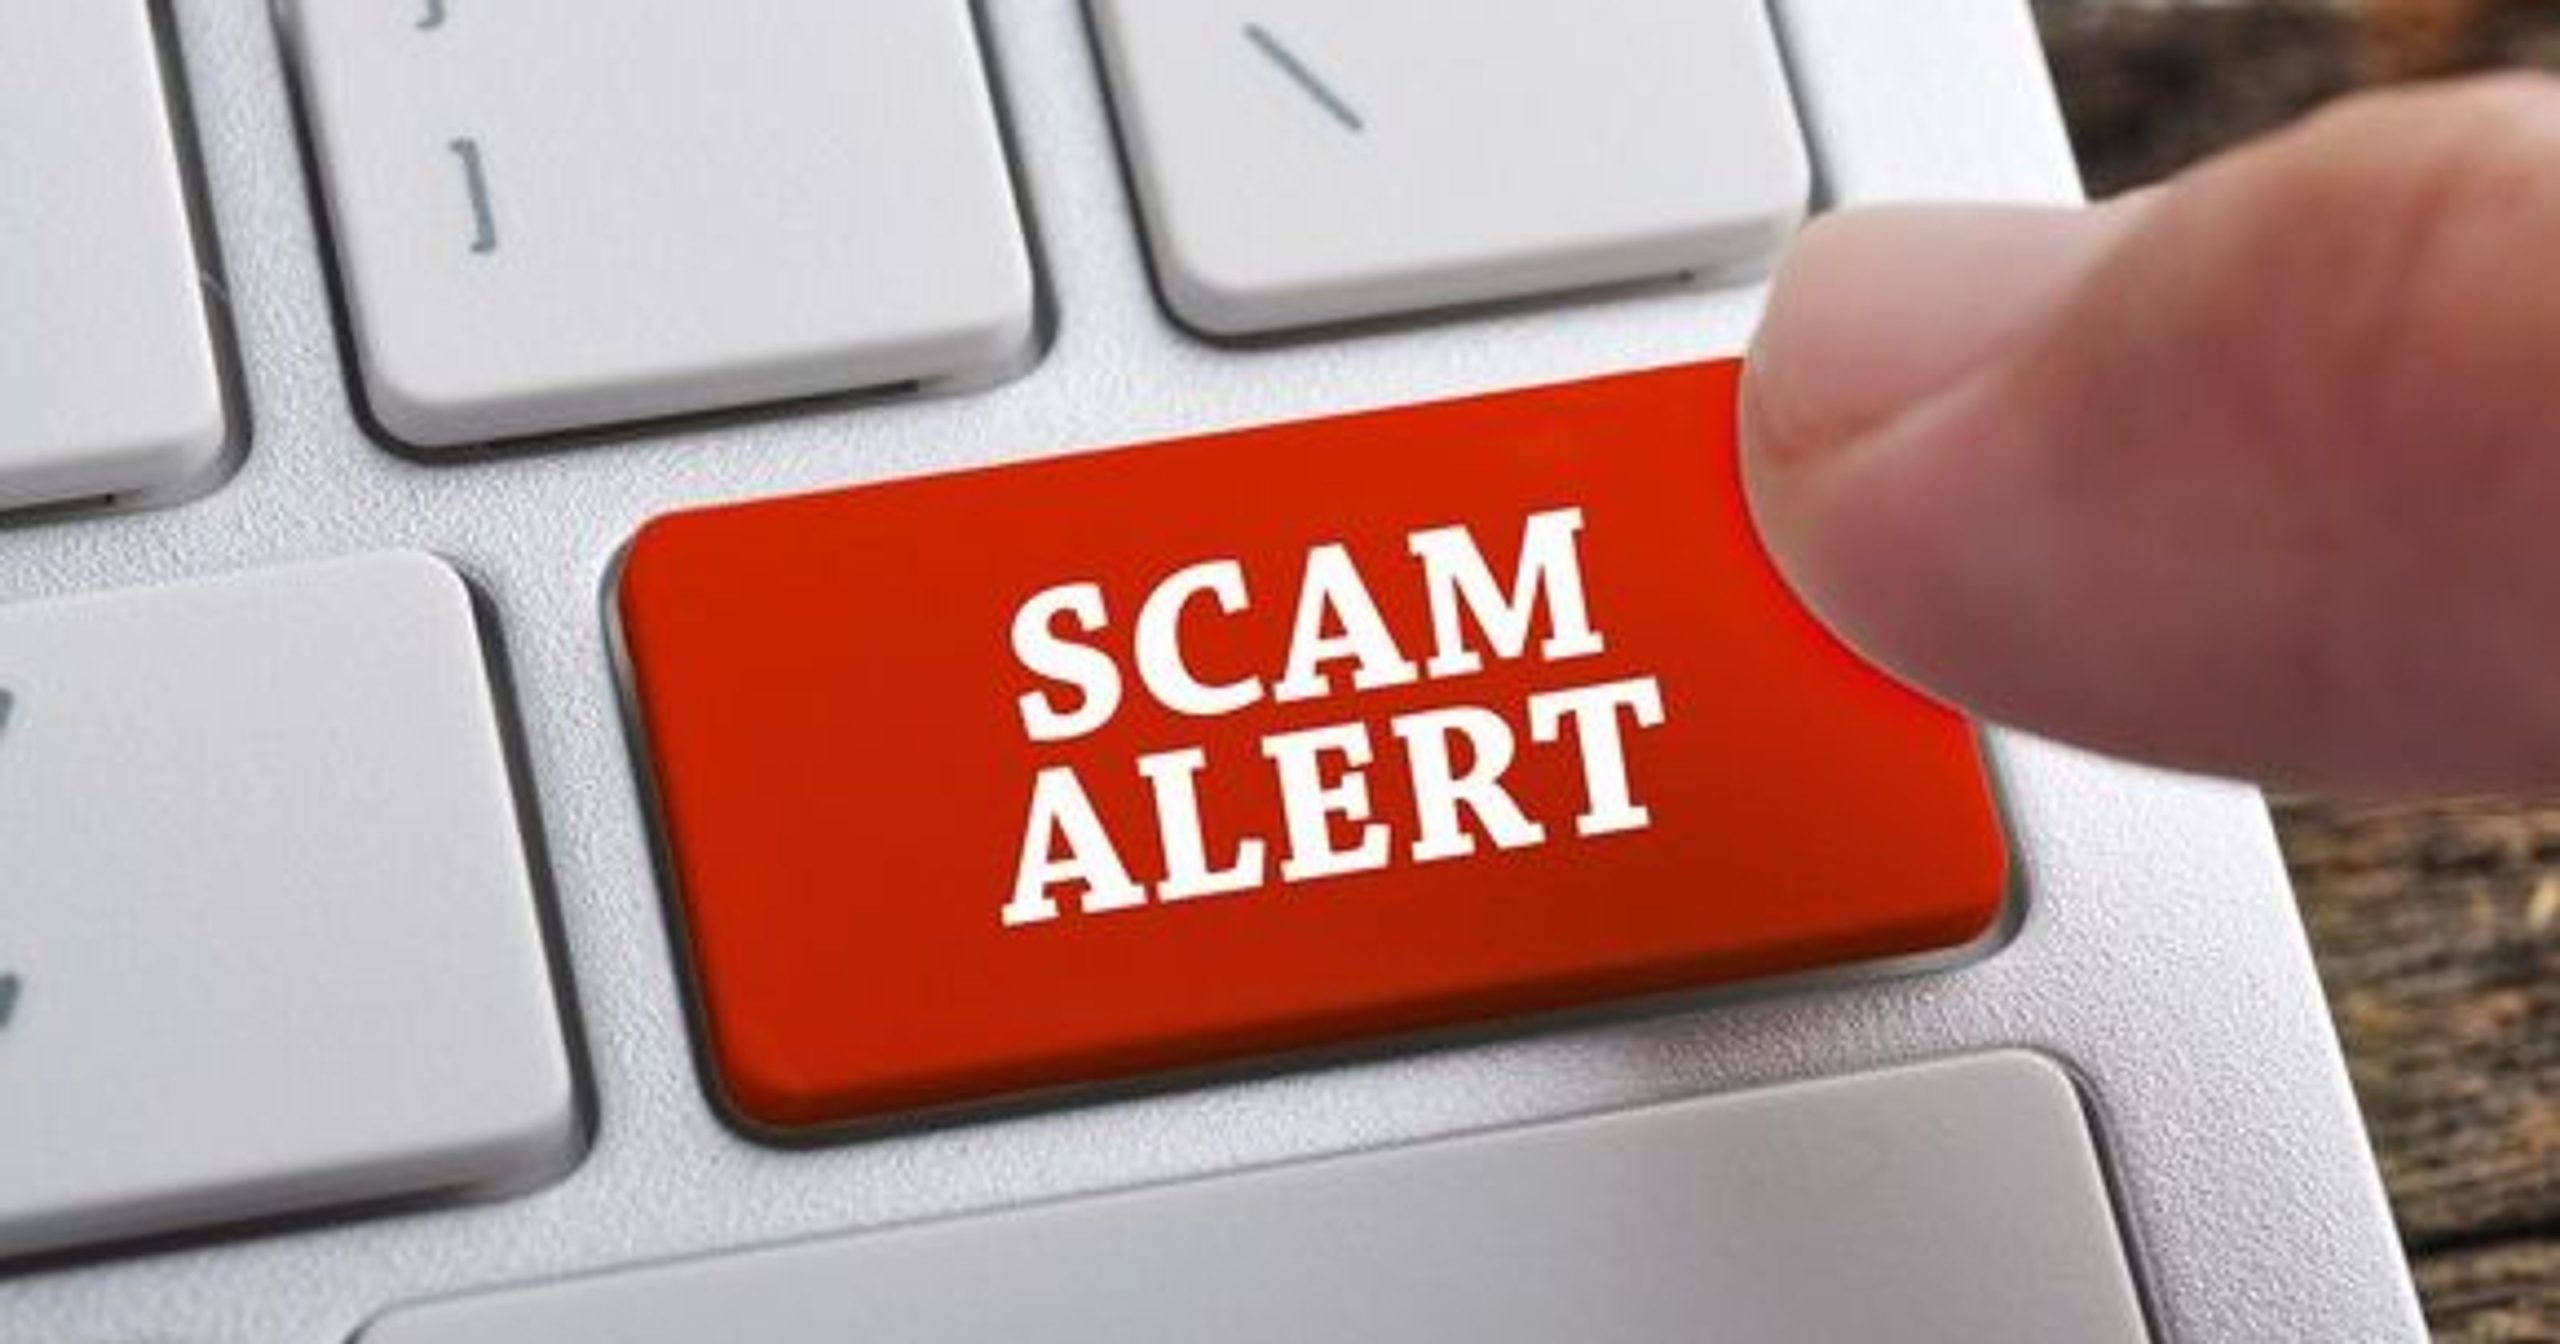 Investors Are Seeking, south africa, theft, btc, bitcoin, brothers  Animoca Brands Warned Of Fake Uniswap V2 Token: Report MotleyFool TMOT b59cde64 scam alert large scaled